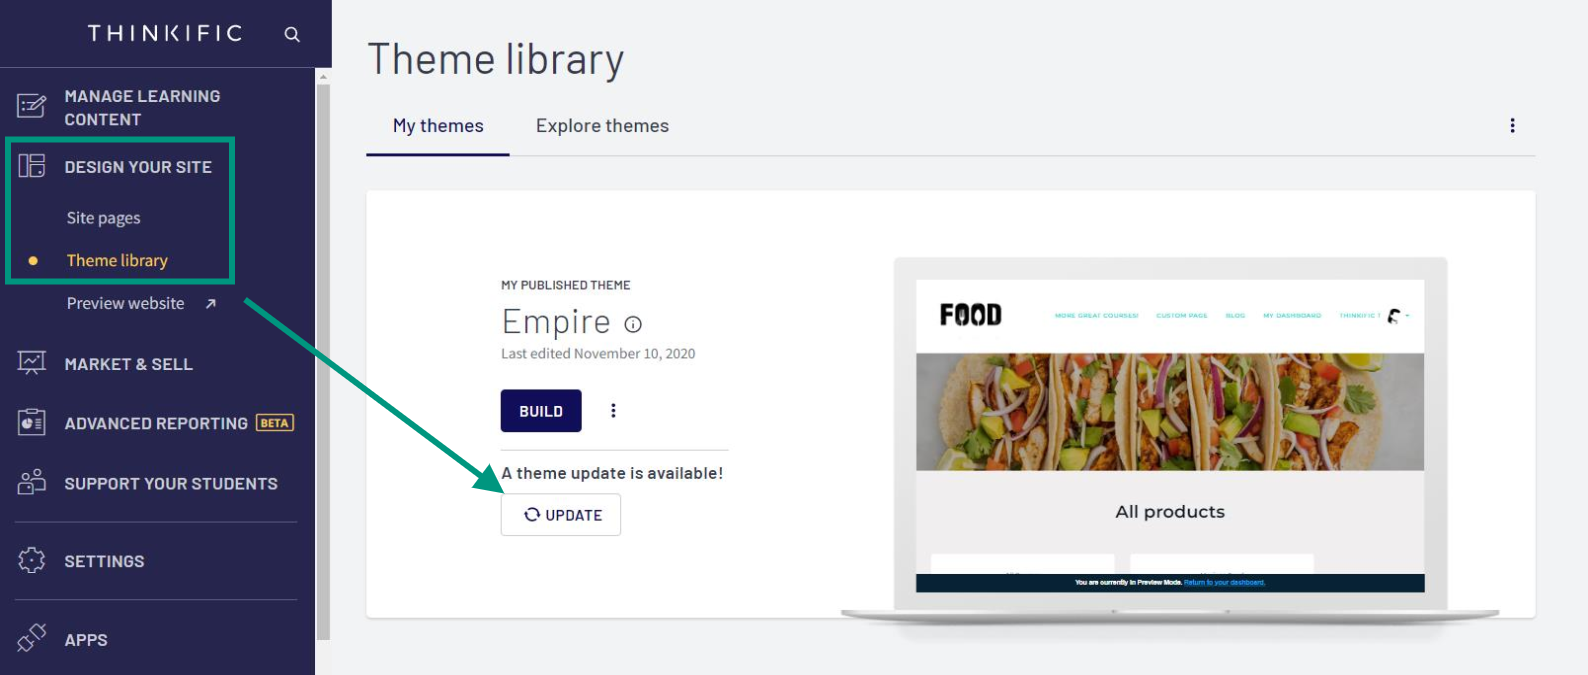 Theme library - Food is Good - Google Chrome 2022-04-27 at 2.53.34 PM.jpeg